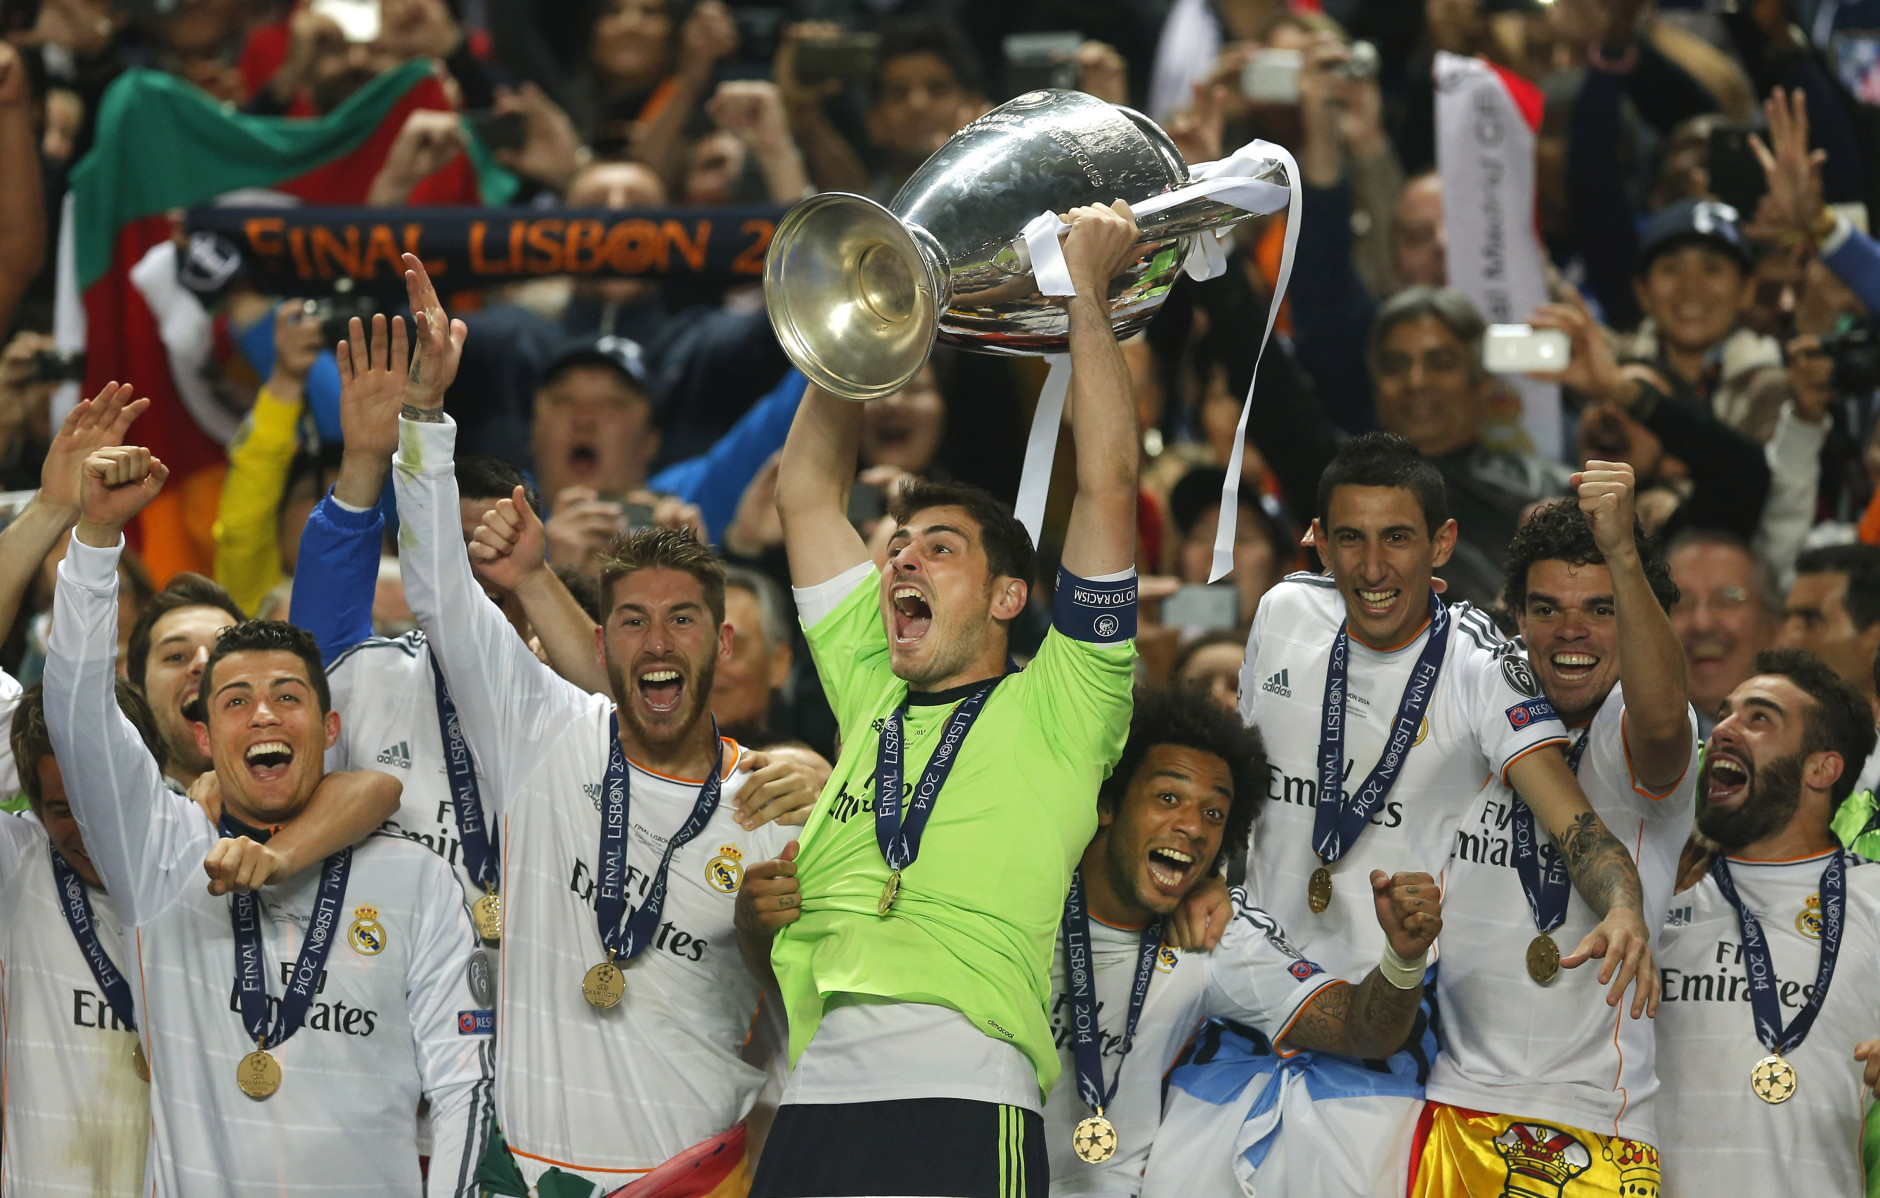 FOR USE AS DESIRED, YEAR END PHOTOS - FILE - Real goalkeeper Iker Casillas, center, lifts the Champion League trophy, as he and teammates, celebrate winning the Champion League title, against Atletico Madrid, in Lisbon, Portugal, Saturday, May 24, 2014.  (AP Photo/Andres Kudacki, File)